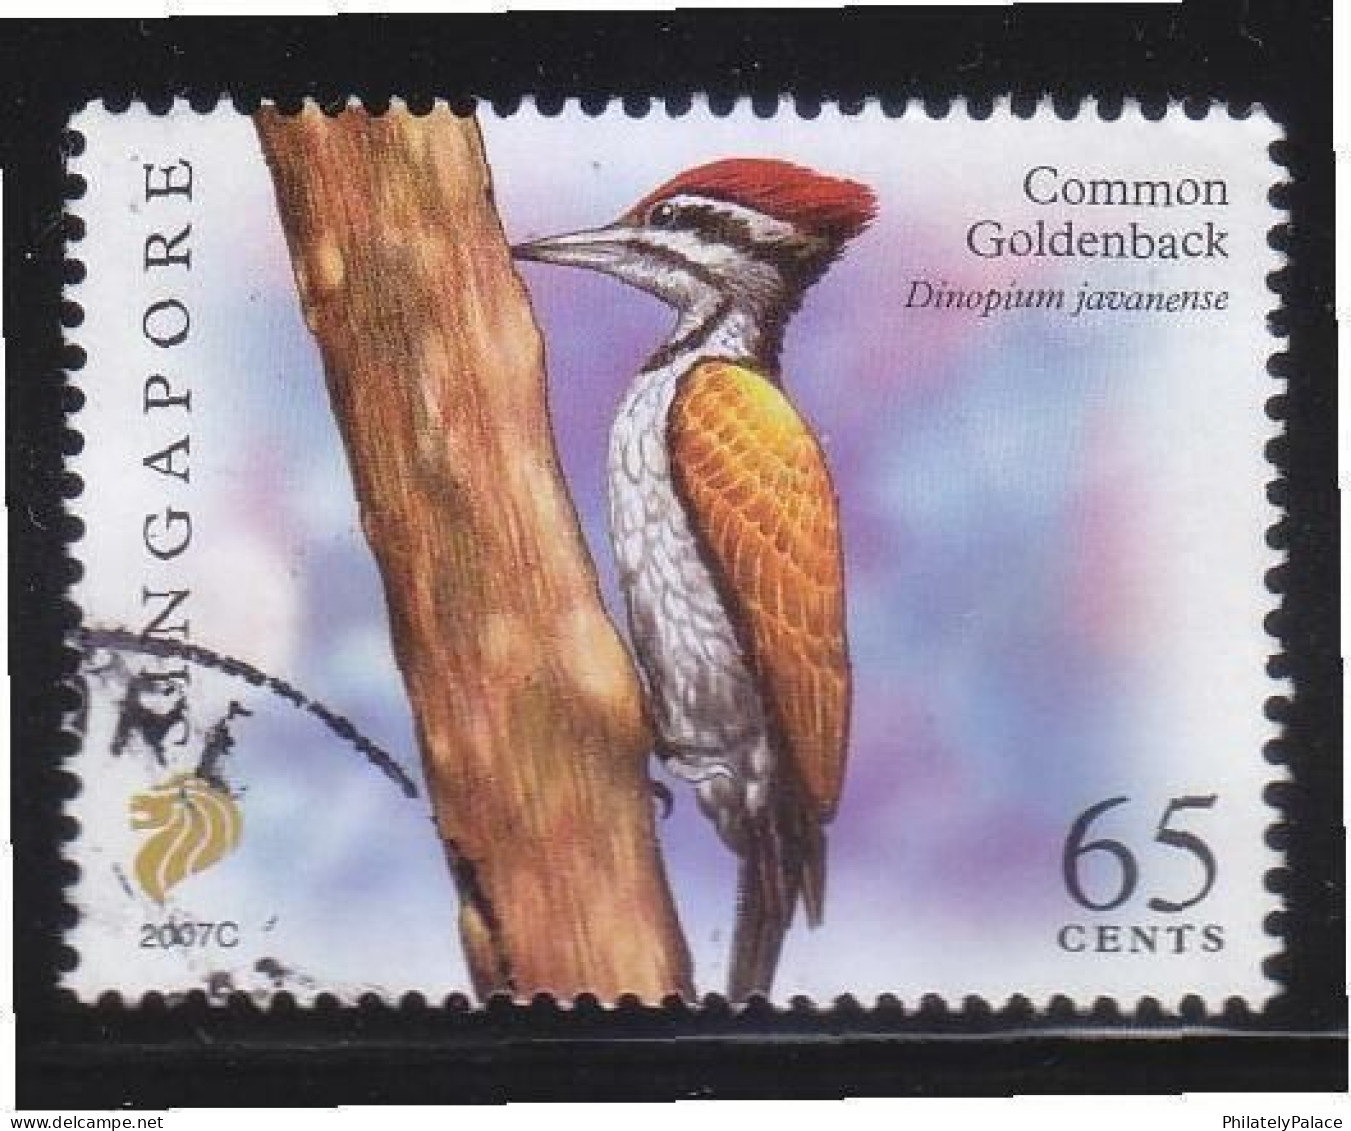 SINGAPORE 2007 COMMON GOLDENBACK, BIRD, $0.65 2ND RE-PRINT (2007C) 1 STAMP IN FINE USED (**) - Singapore (1959-...)